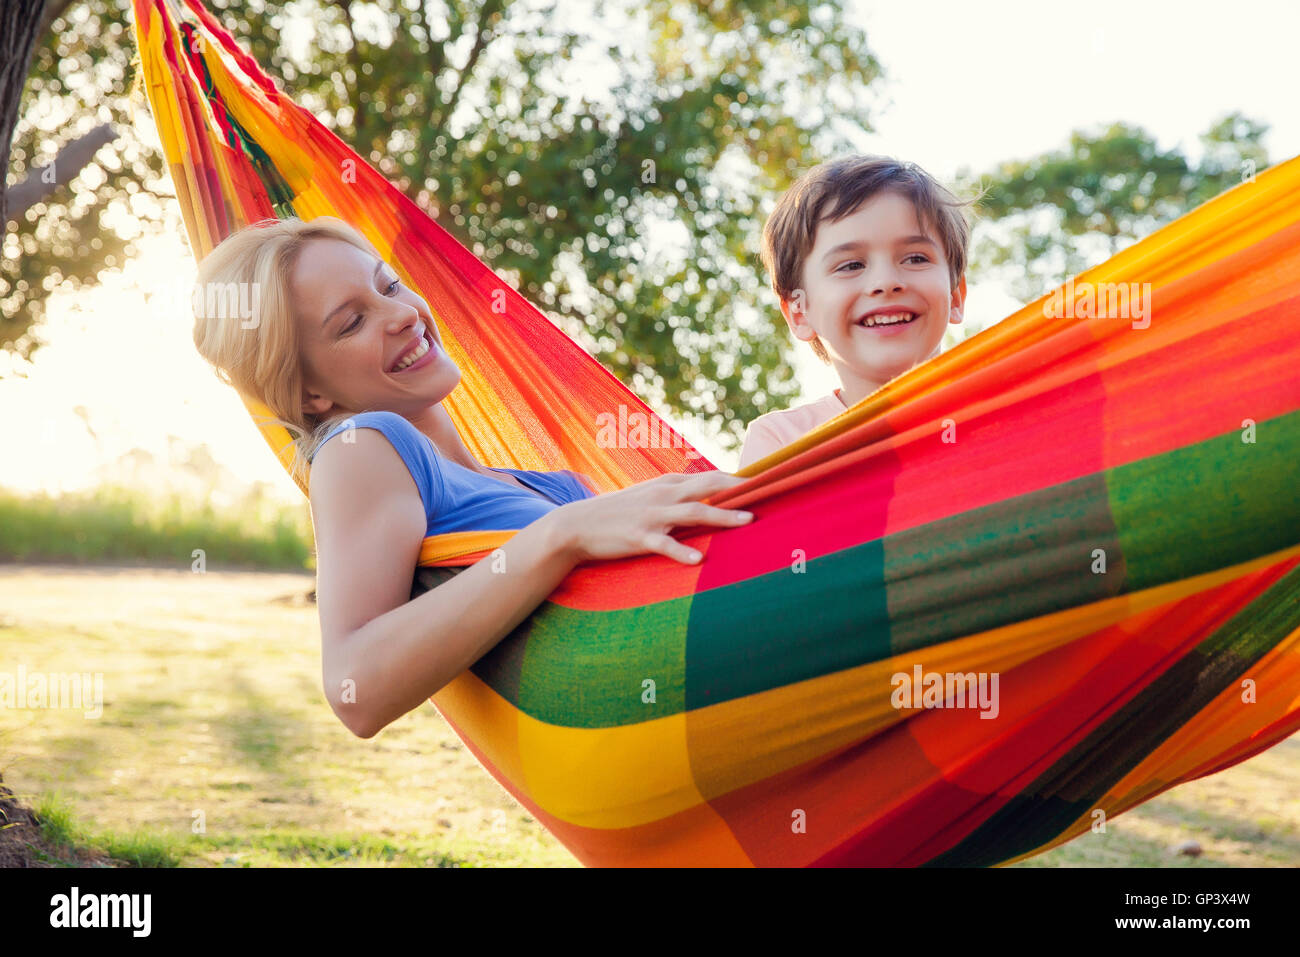 Mother and son relaxing together in hammock Stock Photo